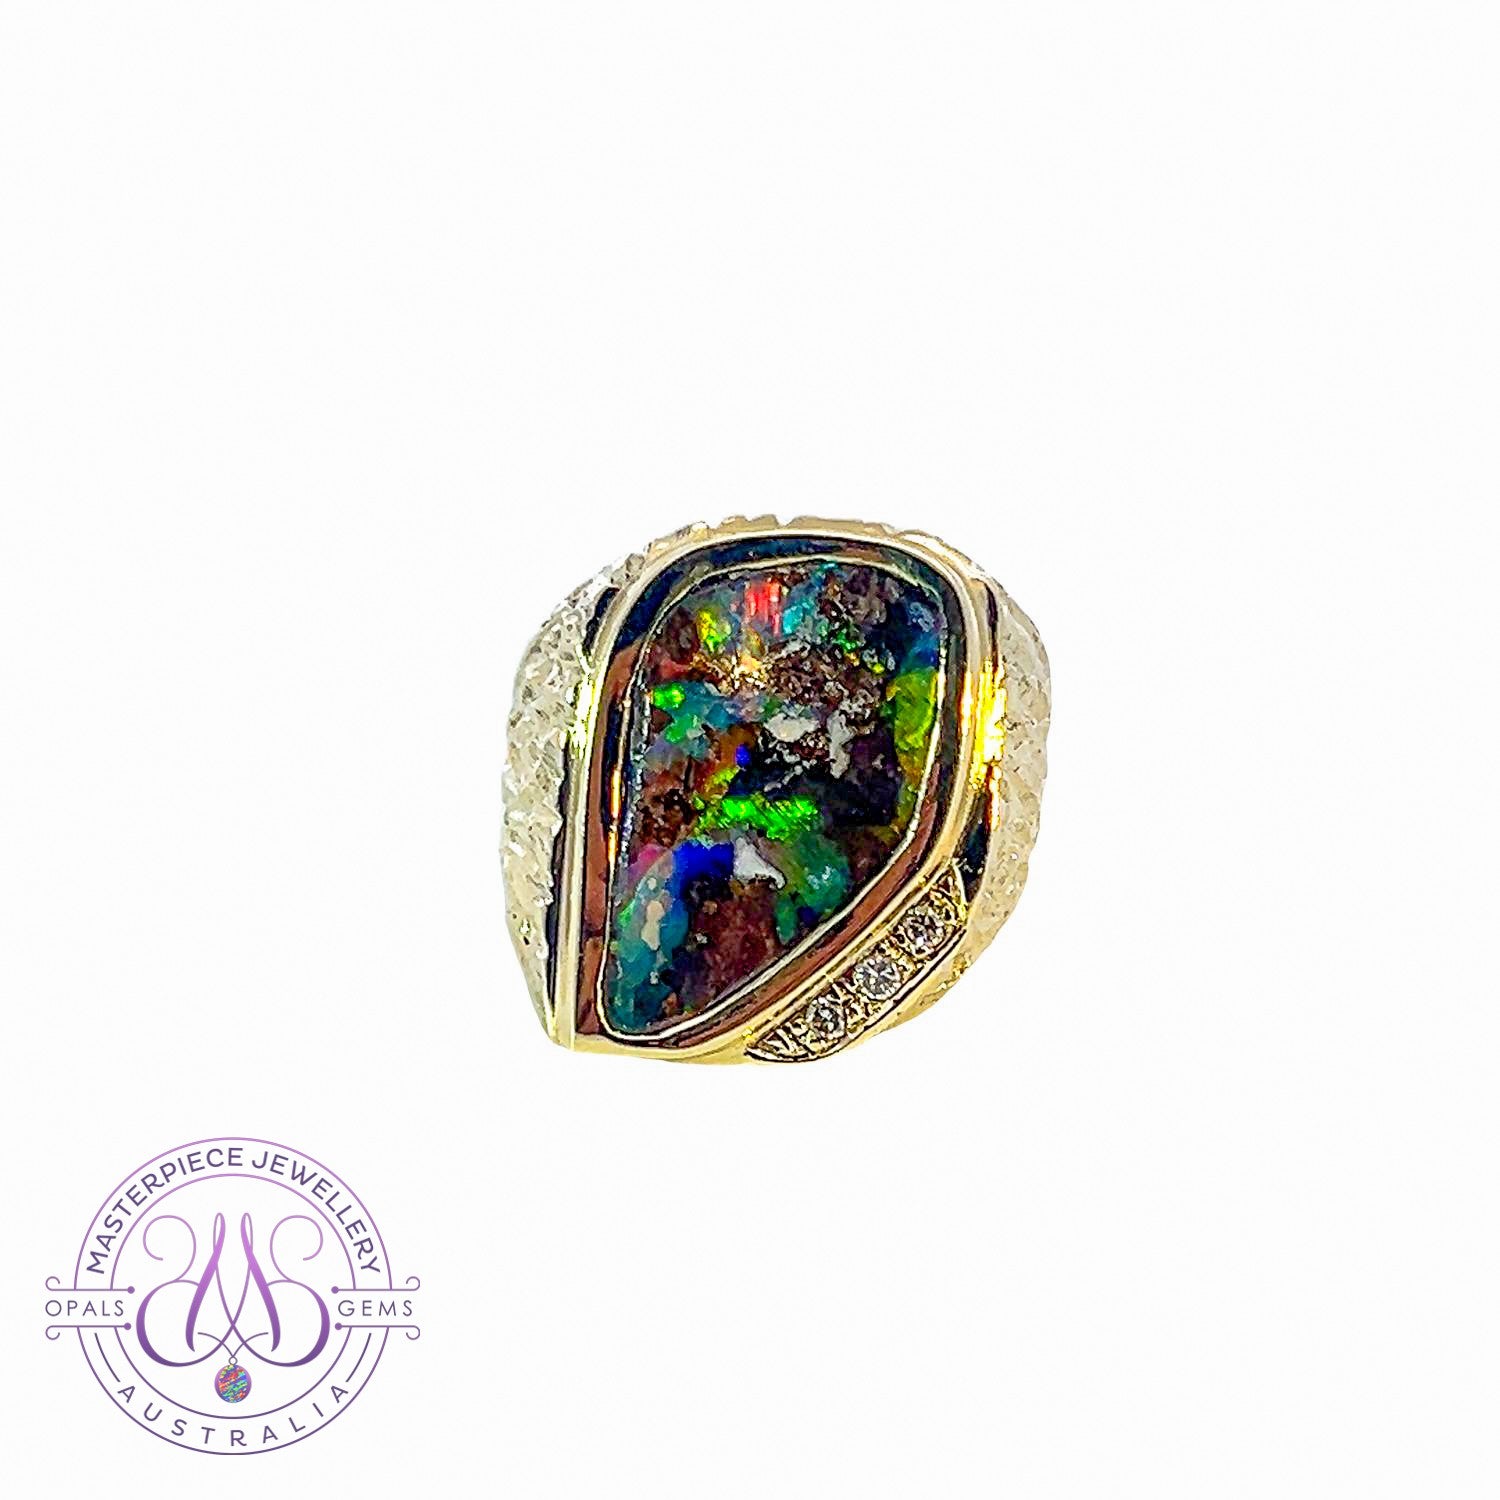 Size 6 1/4 Onyx Opal Inlay Sterling Ring Navajo Artisan Robert Vandever  Special Buy Final Sale NAR-09569 - Four Corners USA Online